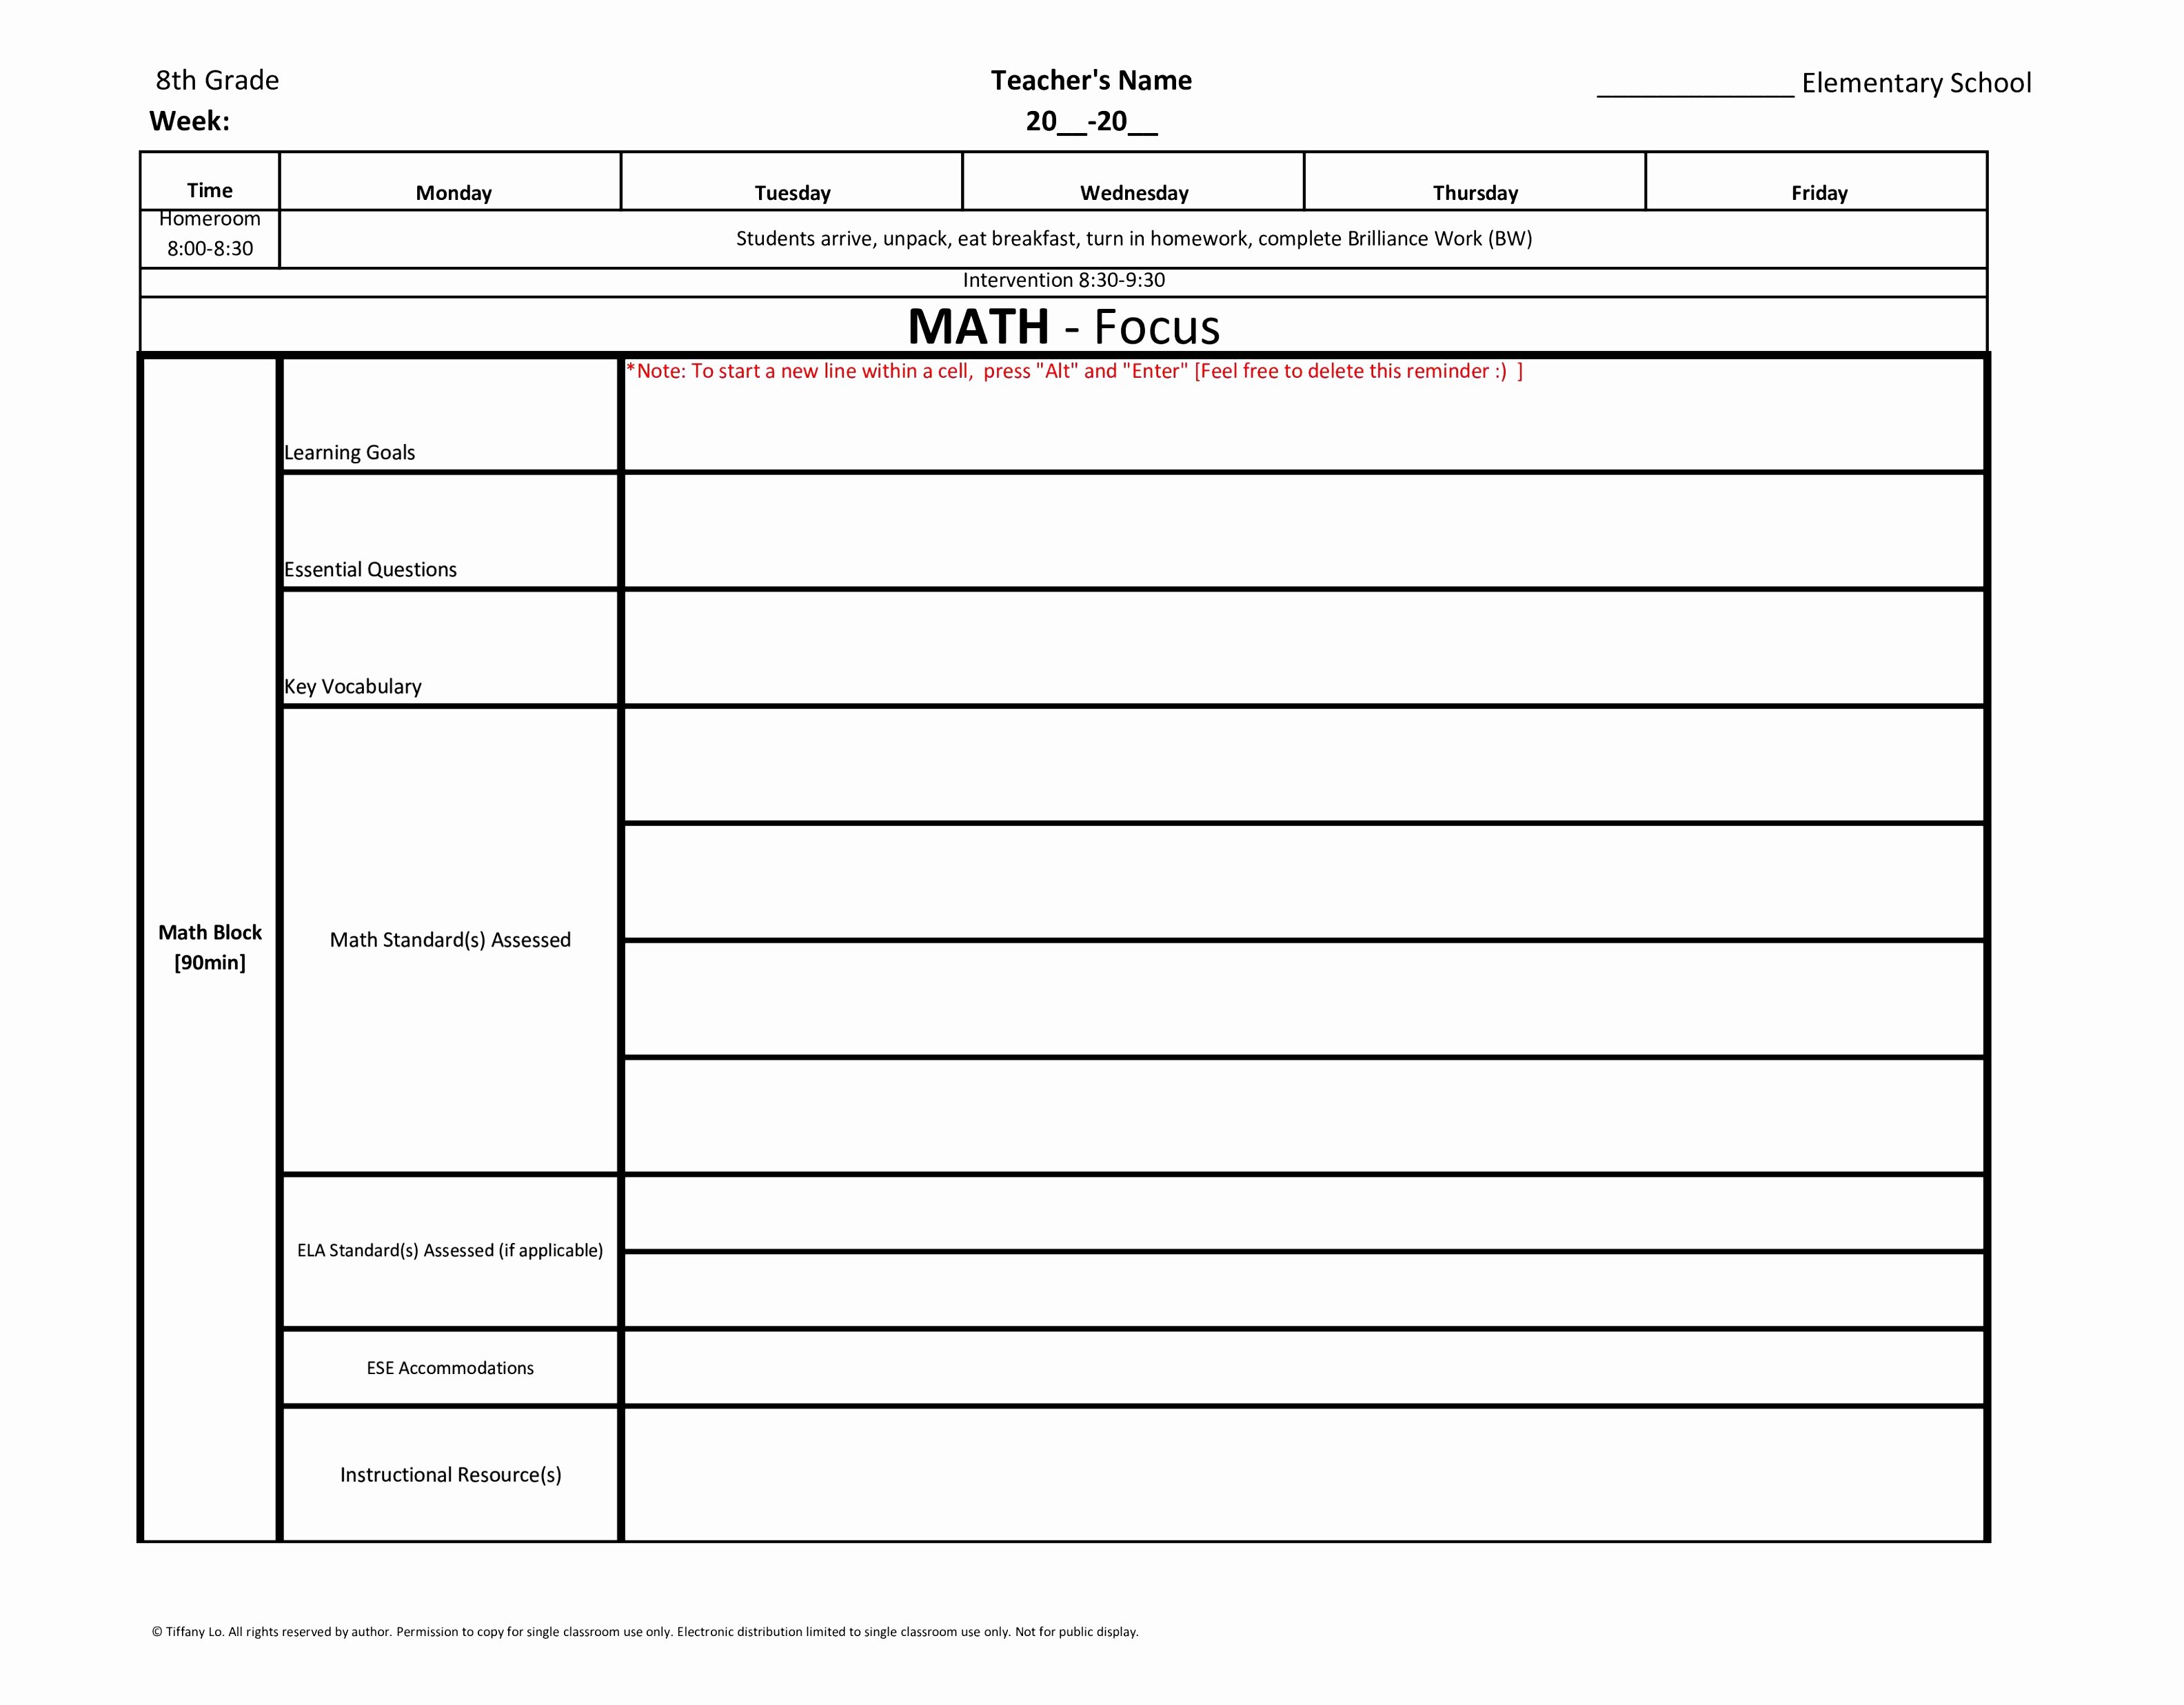 Week Lesson Plan Template Lovely 10 Weekly Lesson Plan Templates for Elementary Teachers